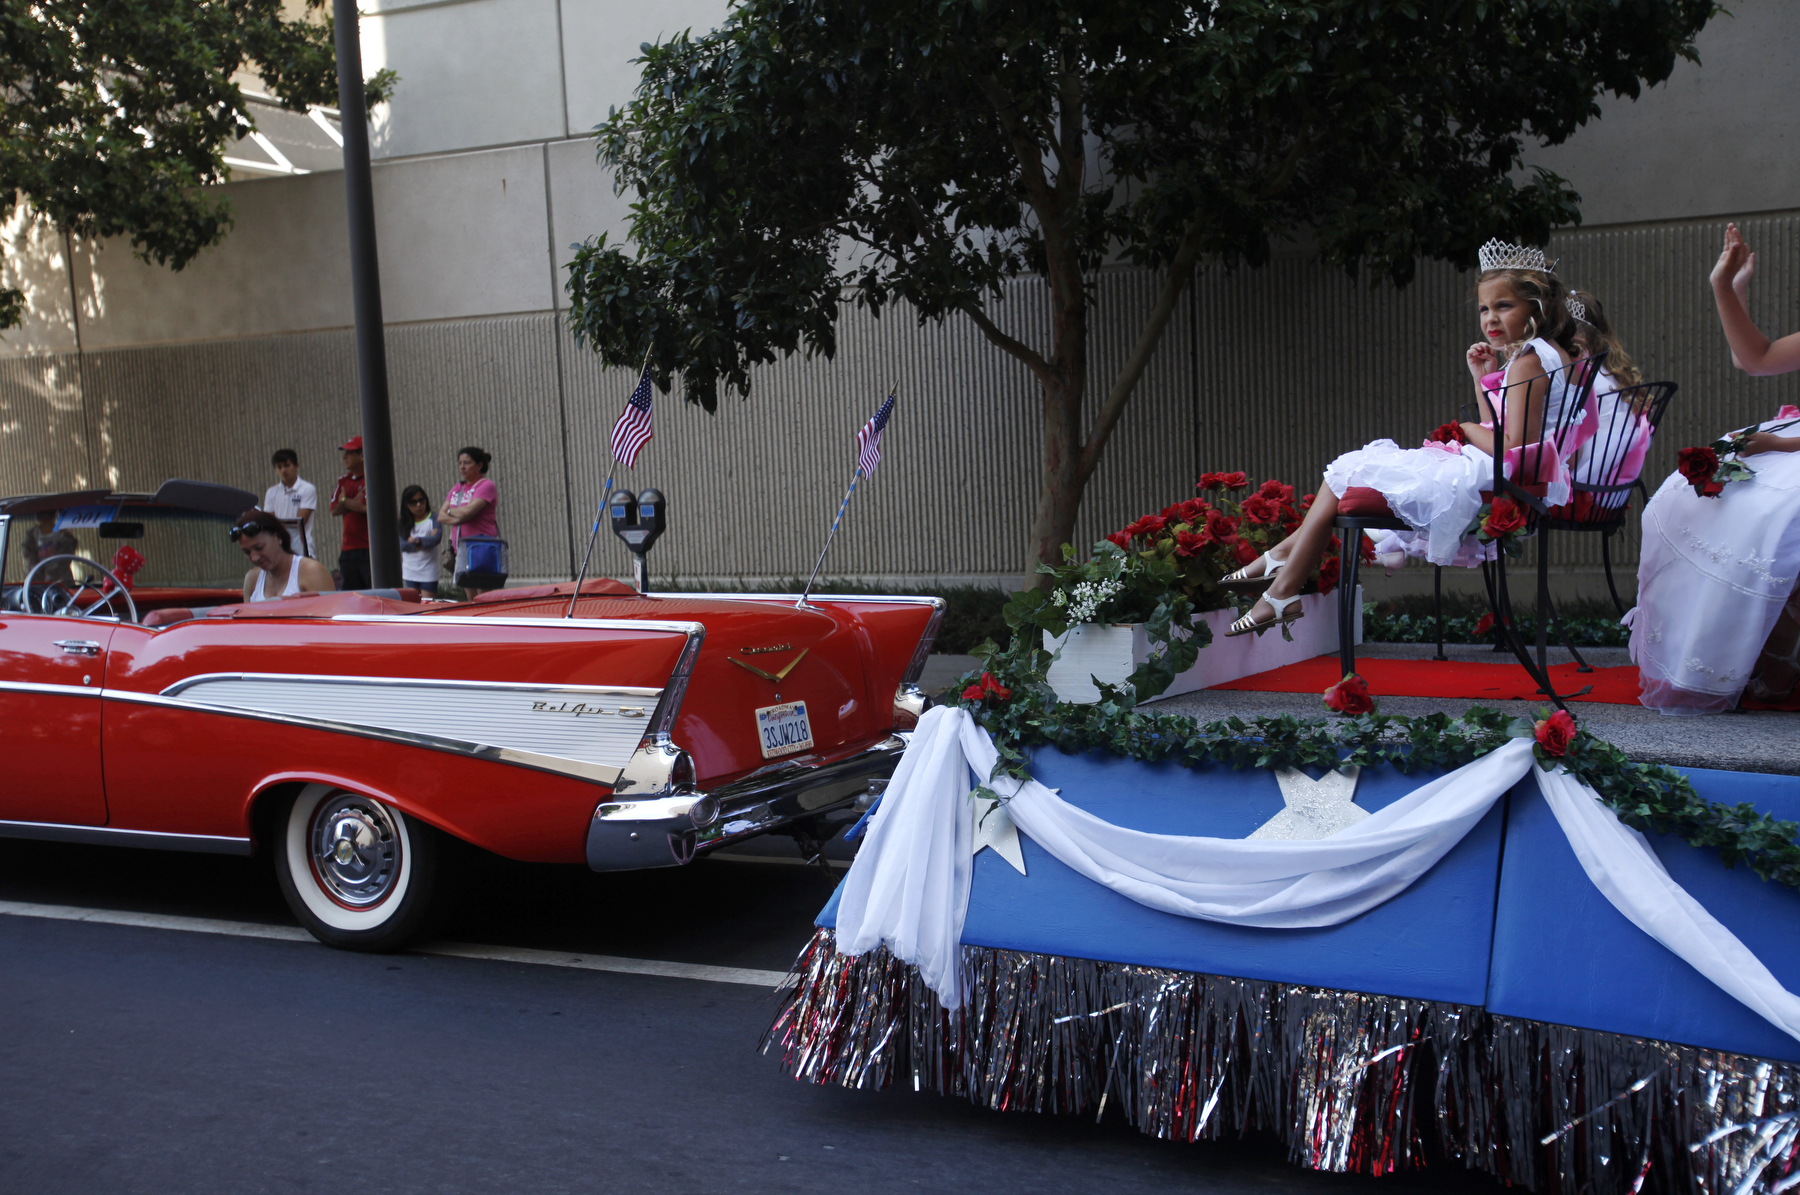 Josie Hussussian, 6, front right, sits with others in the Redwood City, San Mateo County Princess Program members, as they practice their waves before the annual Fourth of July Parade July 4, 2014 in downtown Redwood City, Calif. The parade is the largest and oldest fourth of July parade in the bay area.